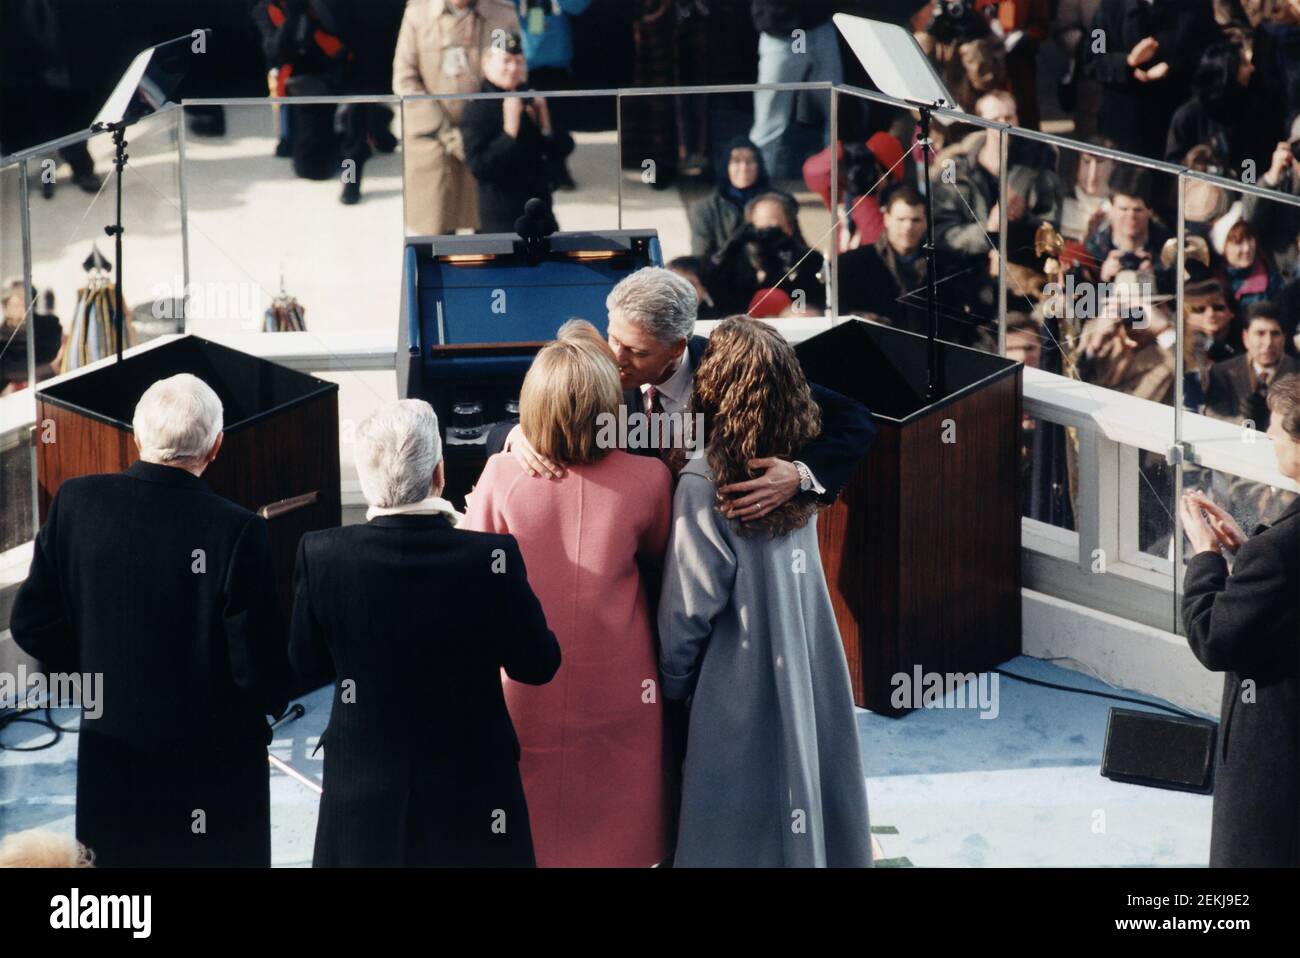 U.S. President Bill Clinton embracing his daughter, Chelsea, and kissing his wife, Hillary, after Presidential Inaugural Ceremonies on west front of U.S. Capitol, Washington, D.C., USA, Architect of the Capitol Collection, January 20, 1997 Stock Photo